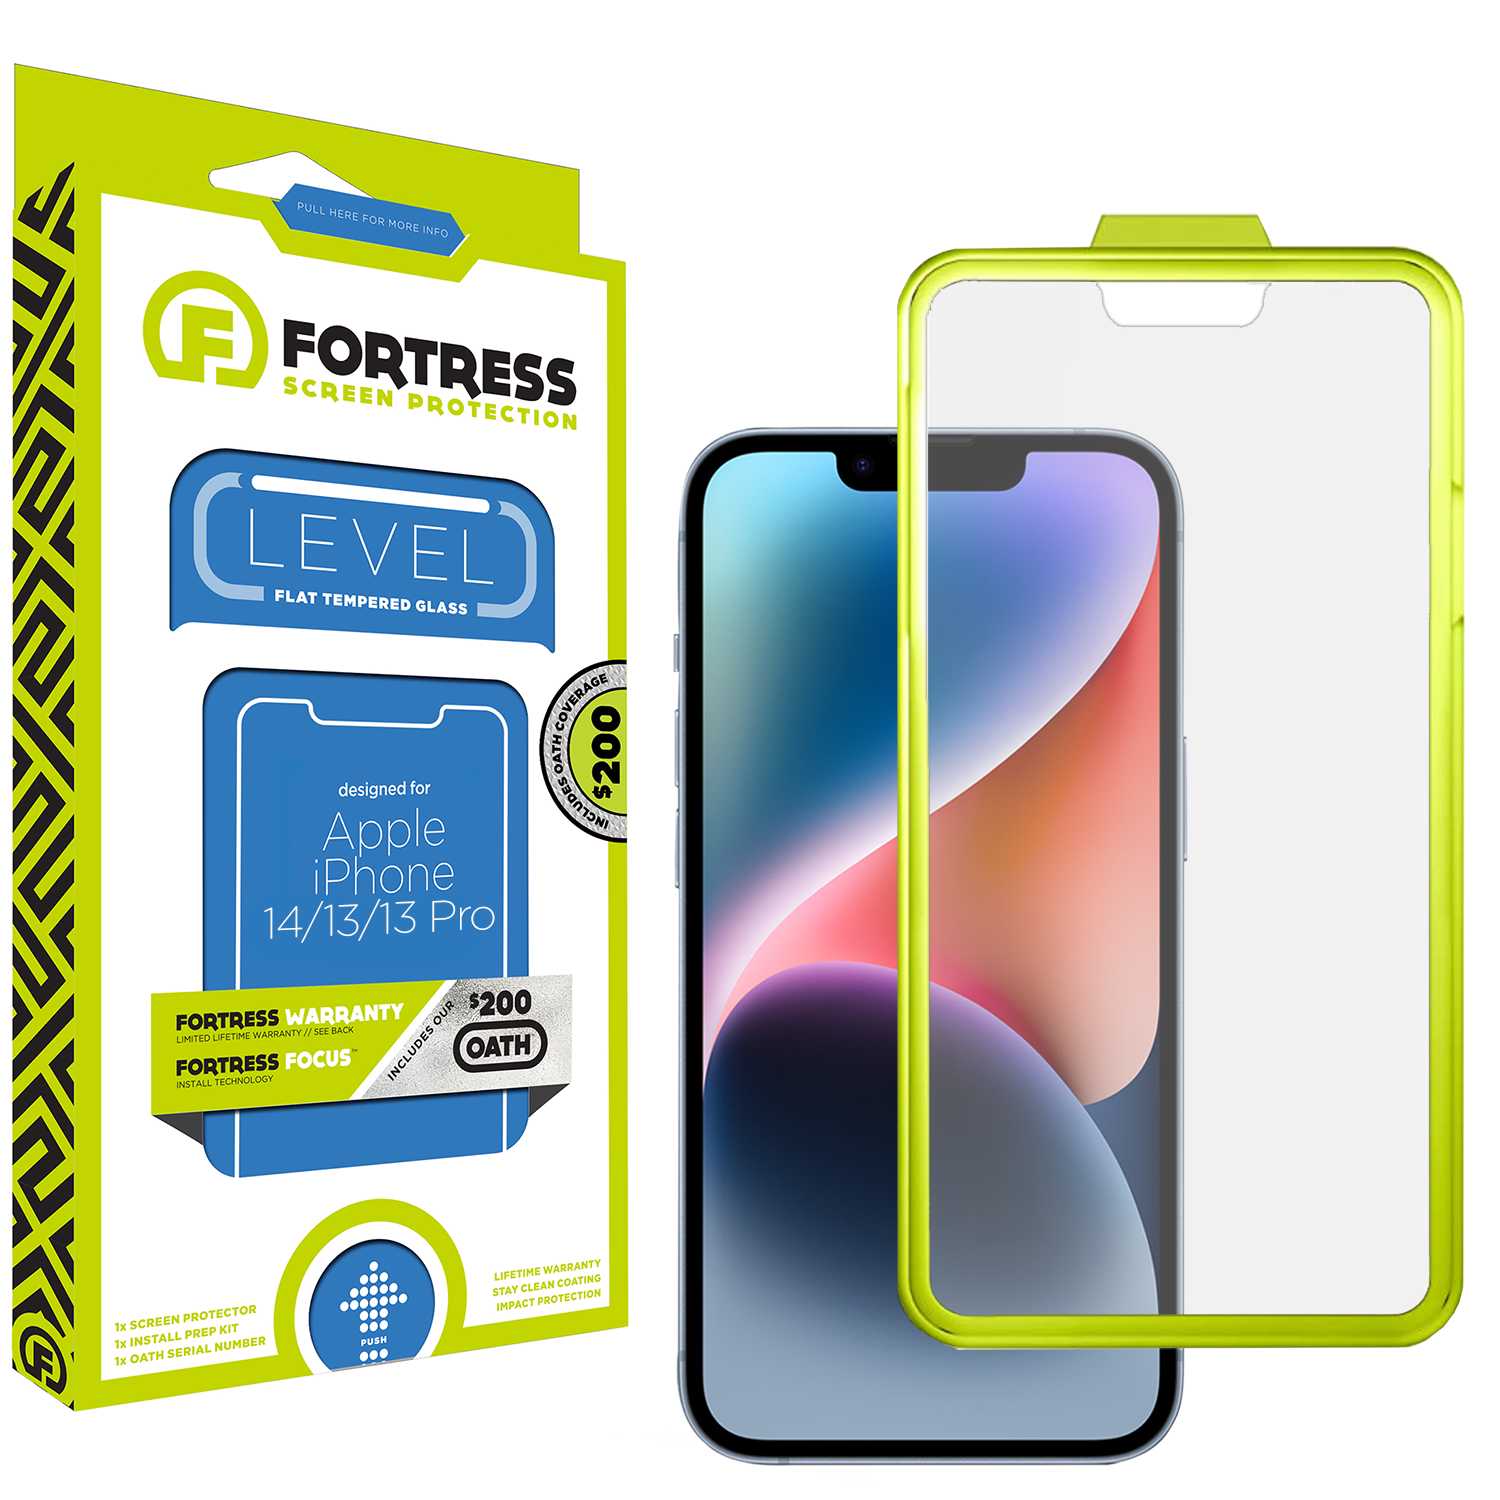 Fortress iPhone 13 Screen Protector $200CoverageInstallTool Scooch Screen Protector